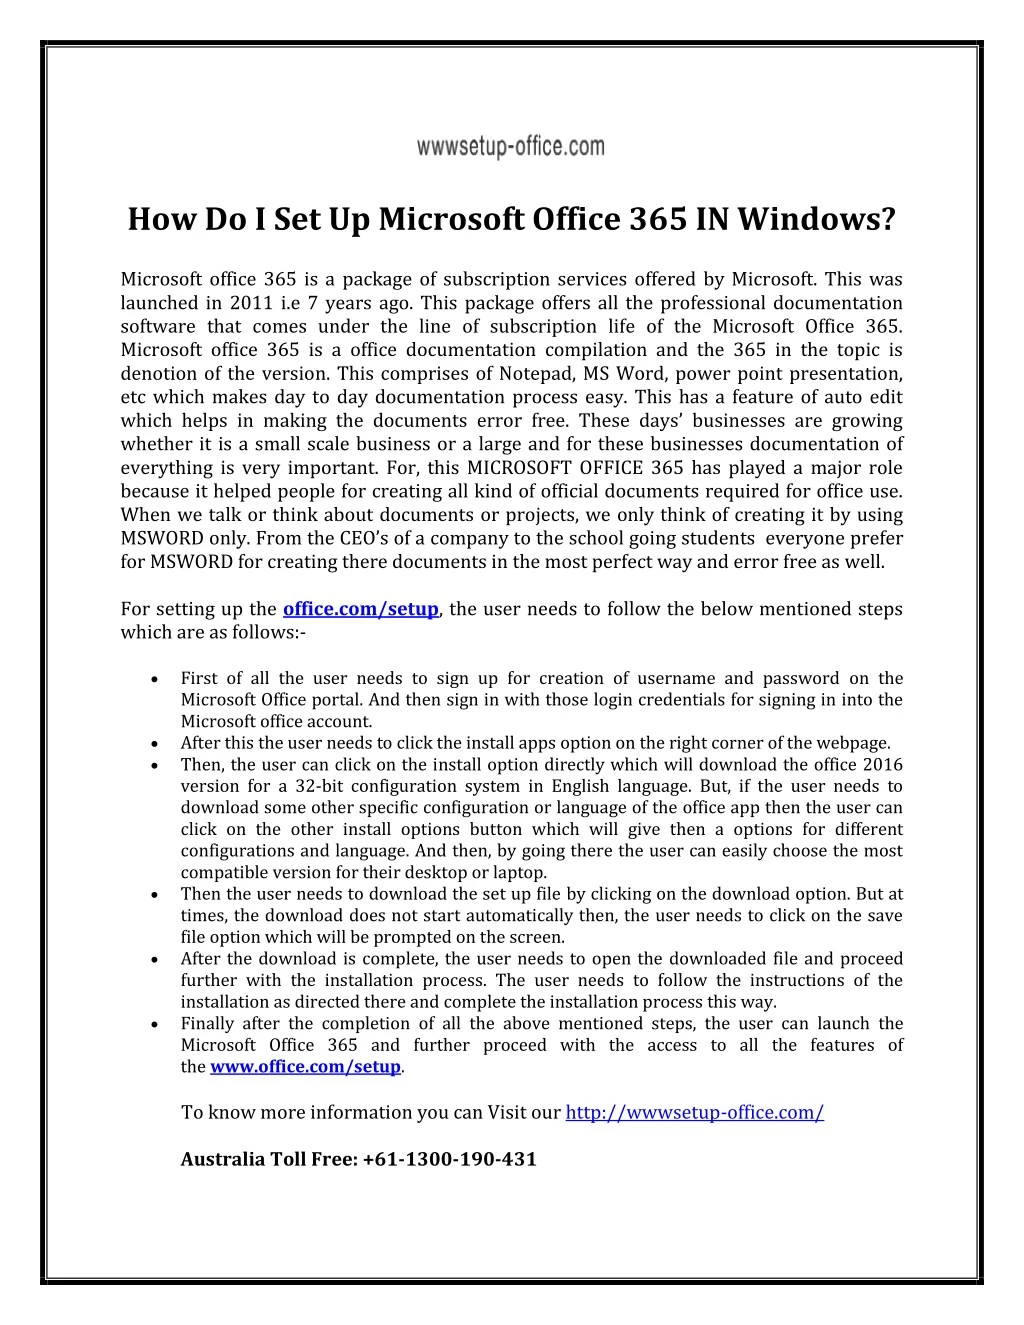 how do i set up microsoft office 365 in windows